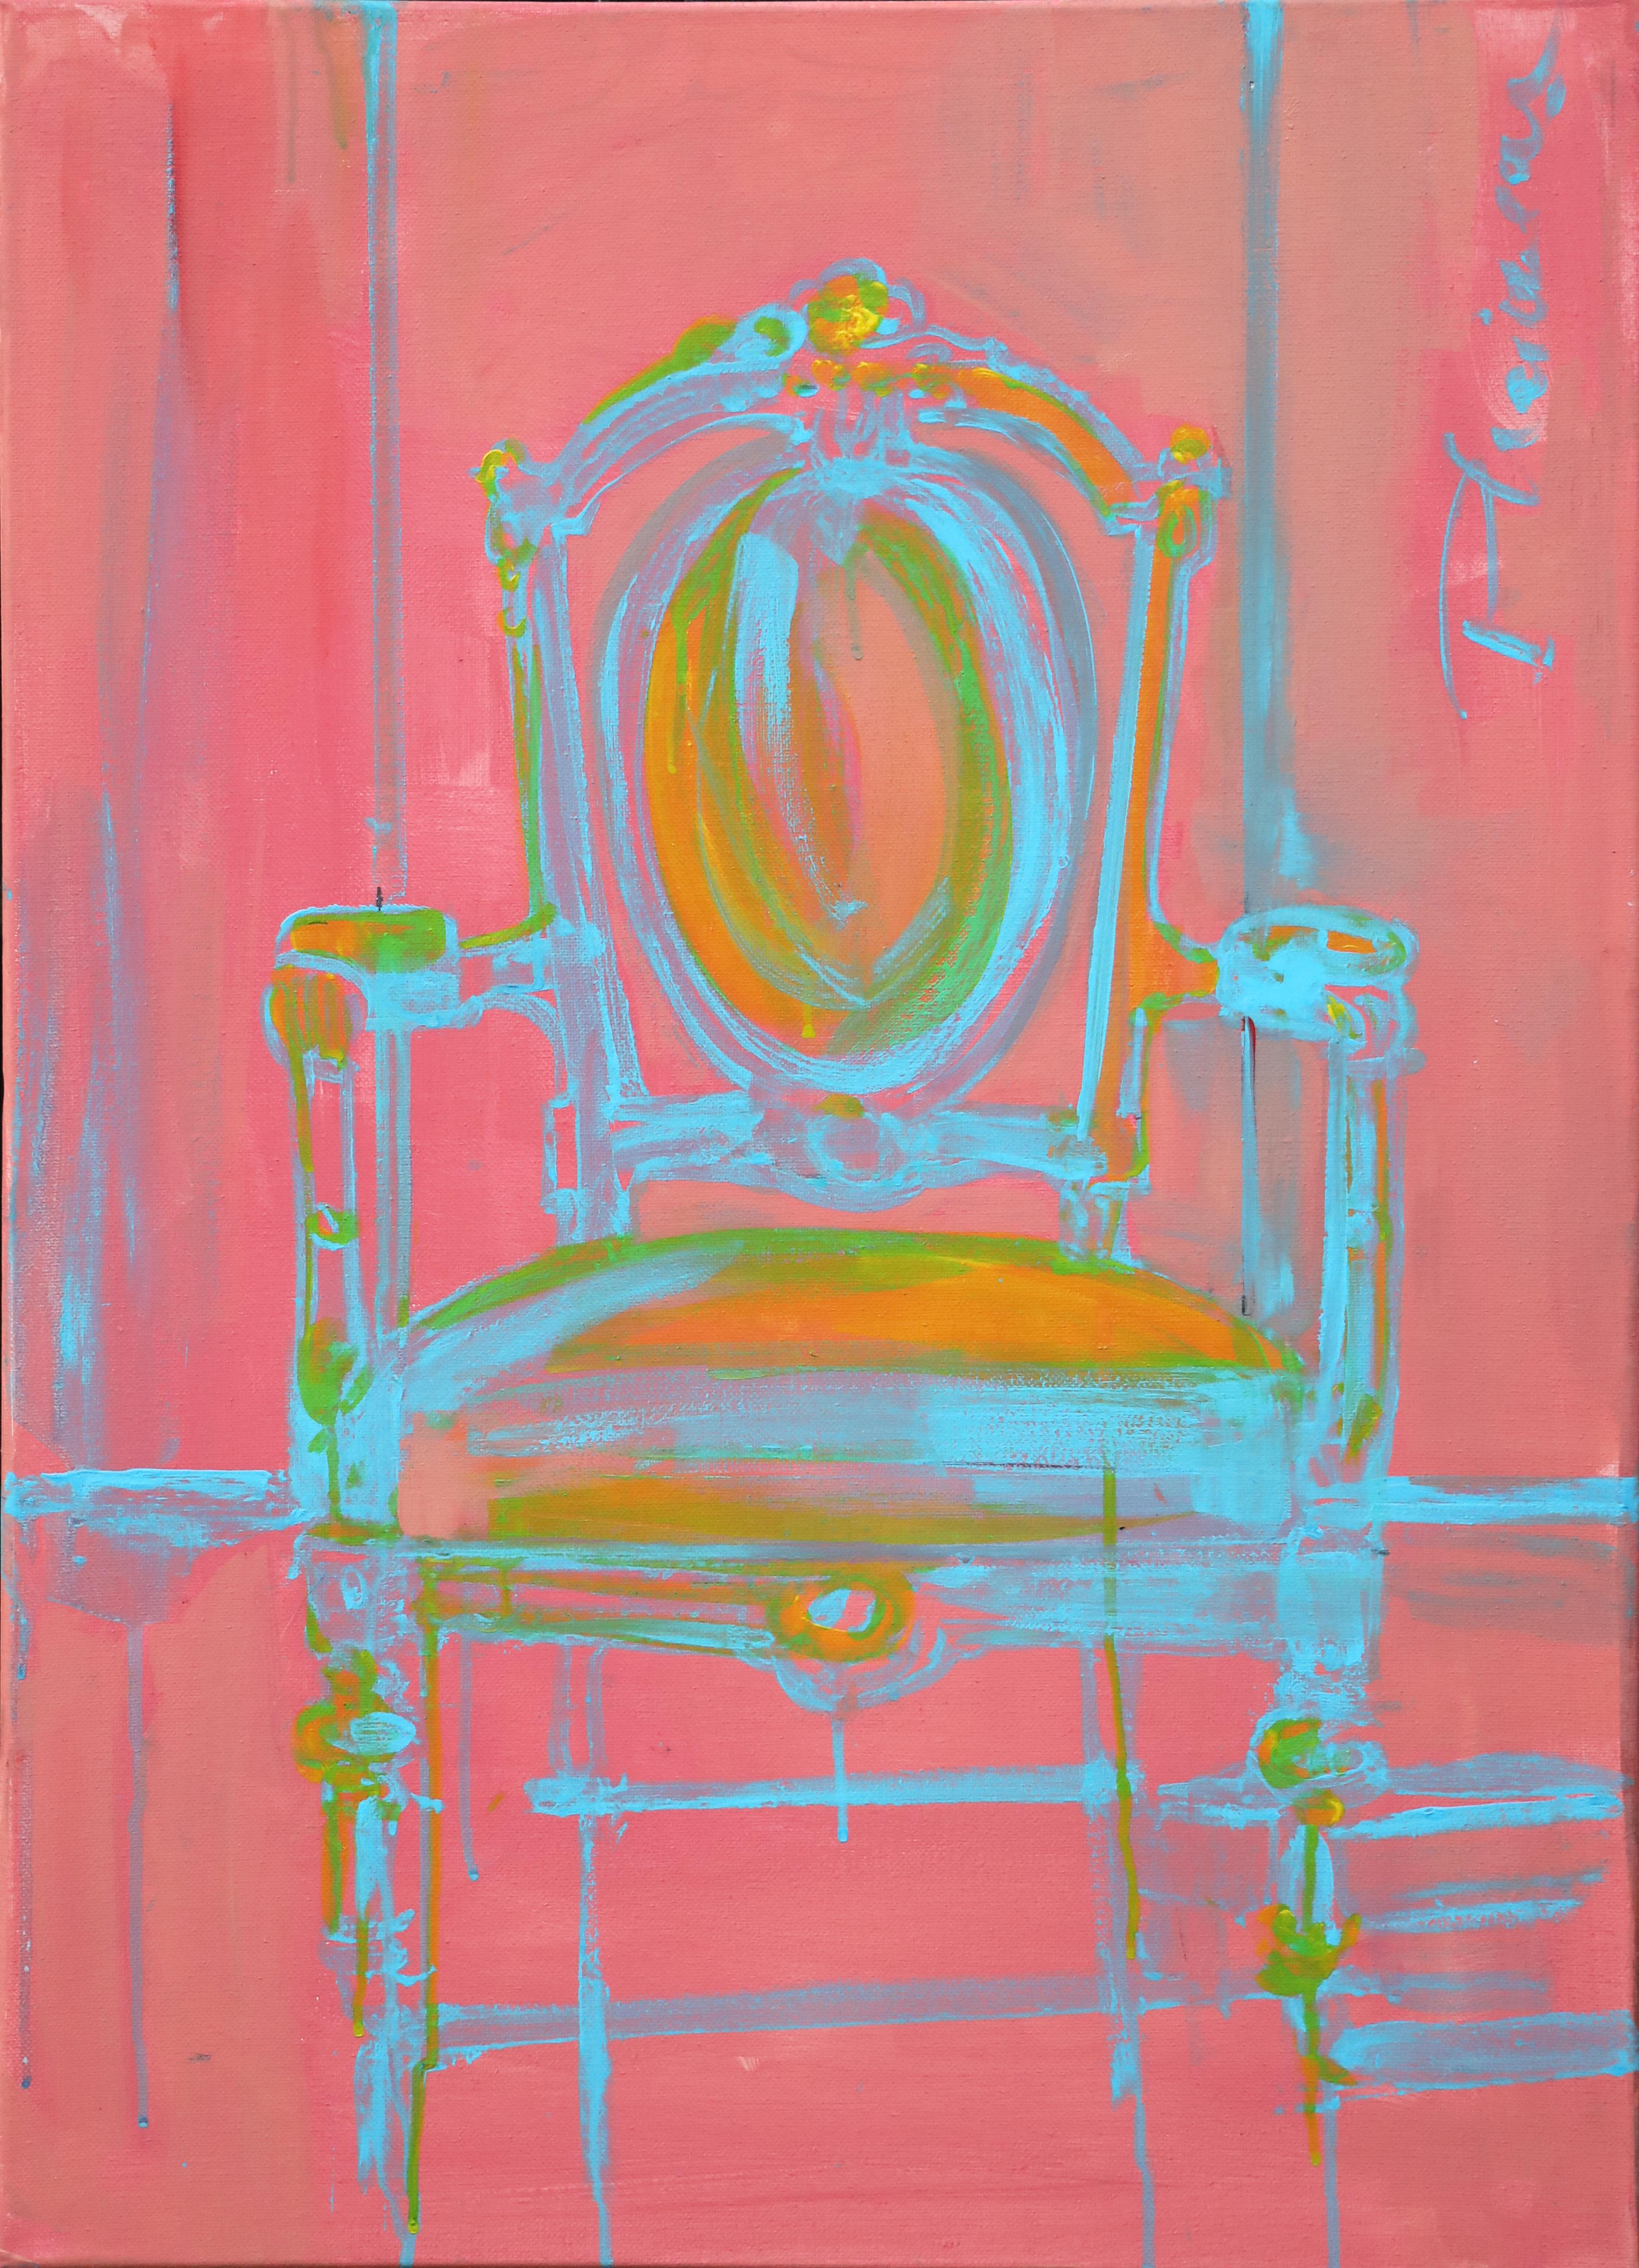 Louis XVI #3
Part of "Mixed Moods" solo show, until September 29.
Original painting.  Size 27.5x19.5in / 70x50cm . Acrylic on canvas.

The period armchair, style Louis XVI, become the subject of a series of paintings. This armchair is in my studio,